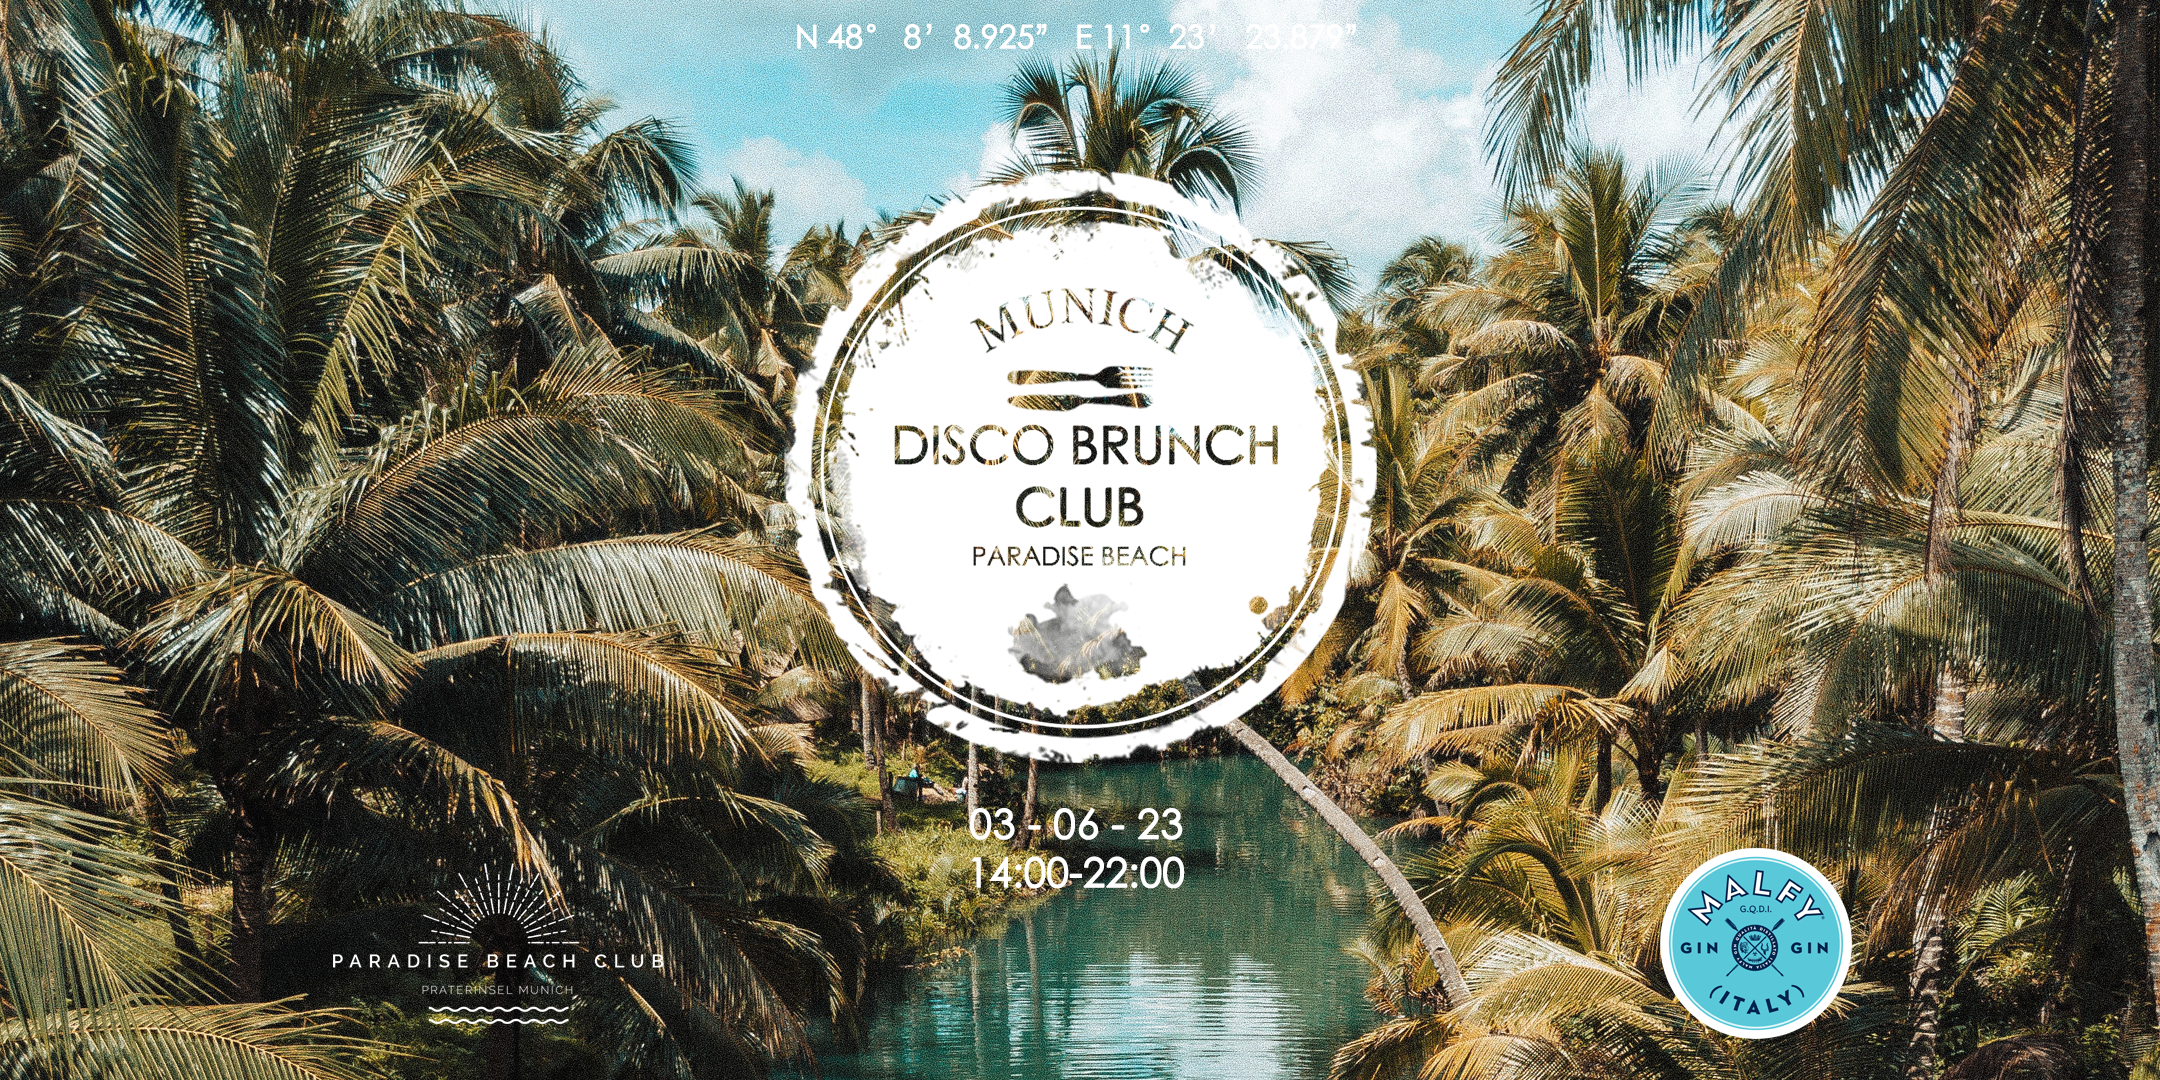 You are currently viewing Munich Disco Brunch